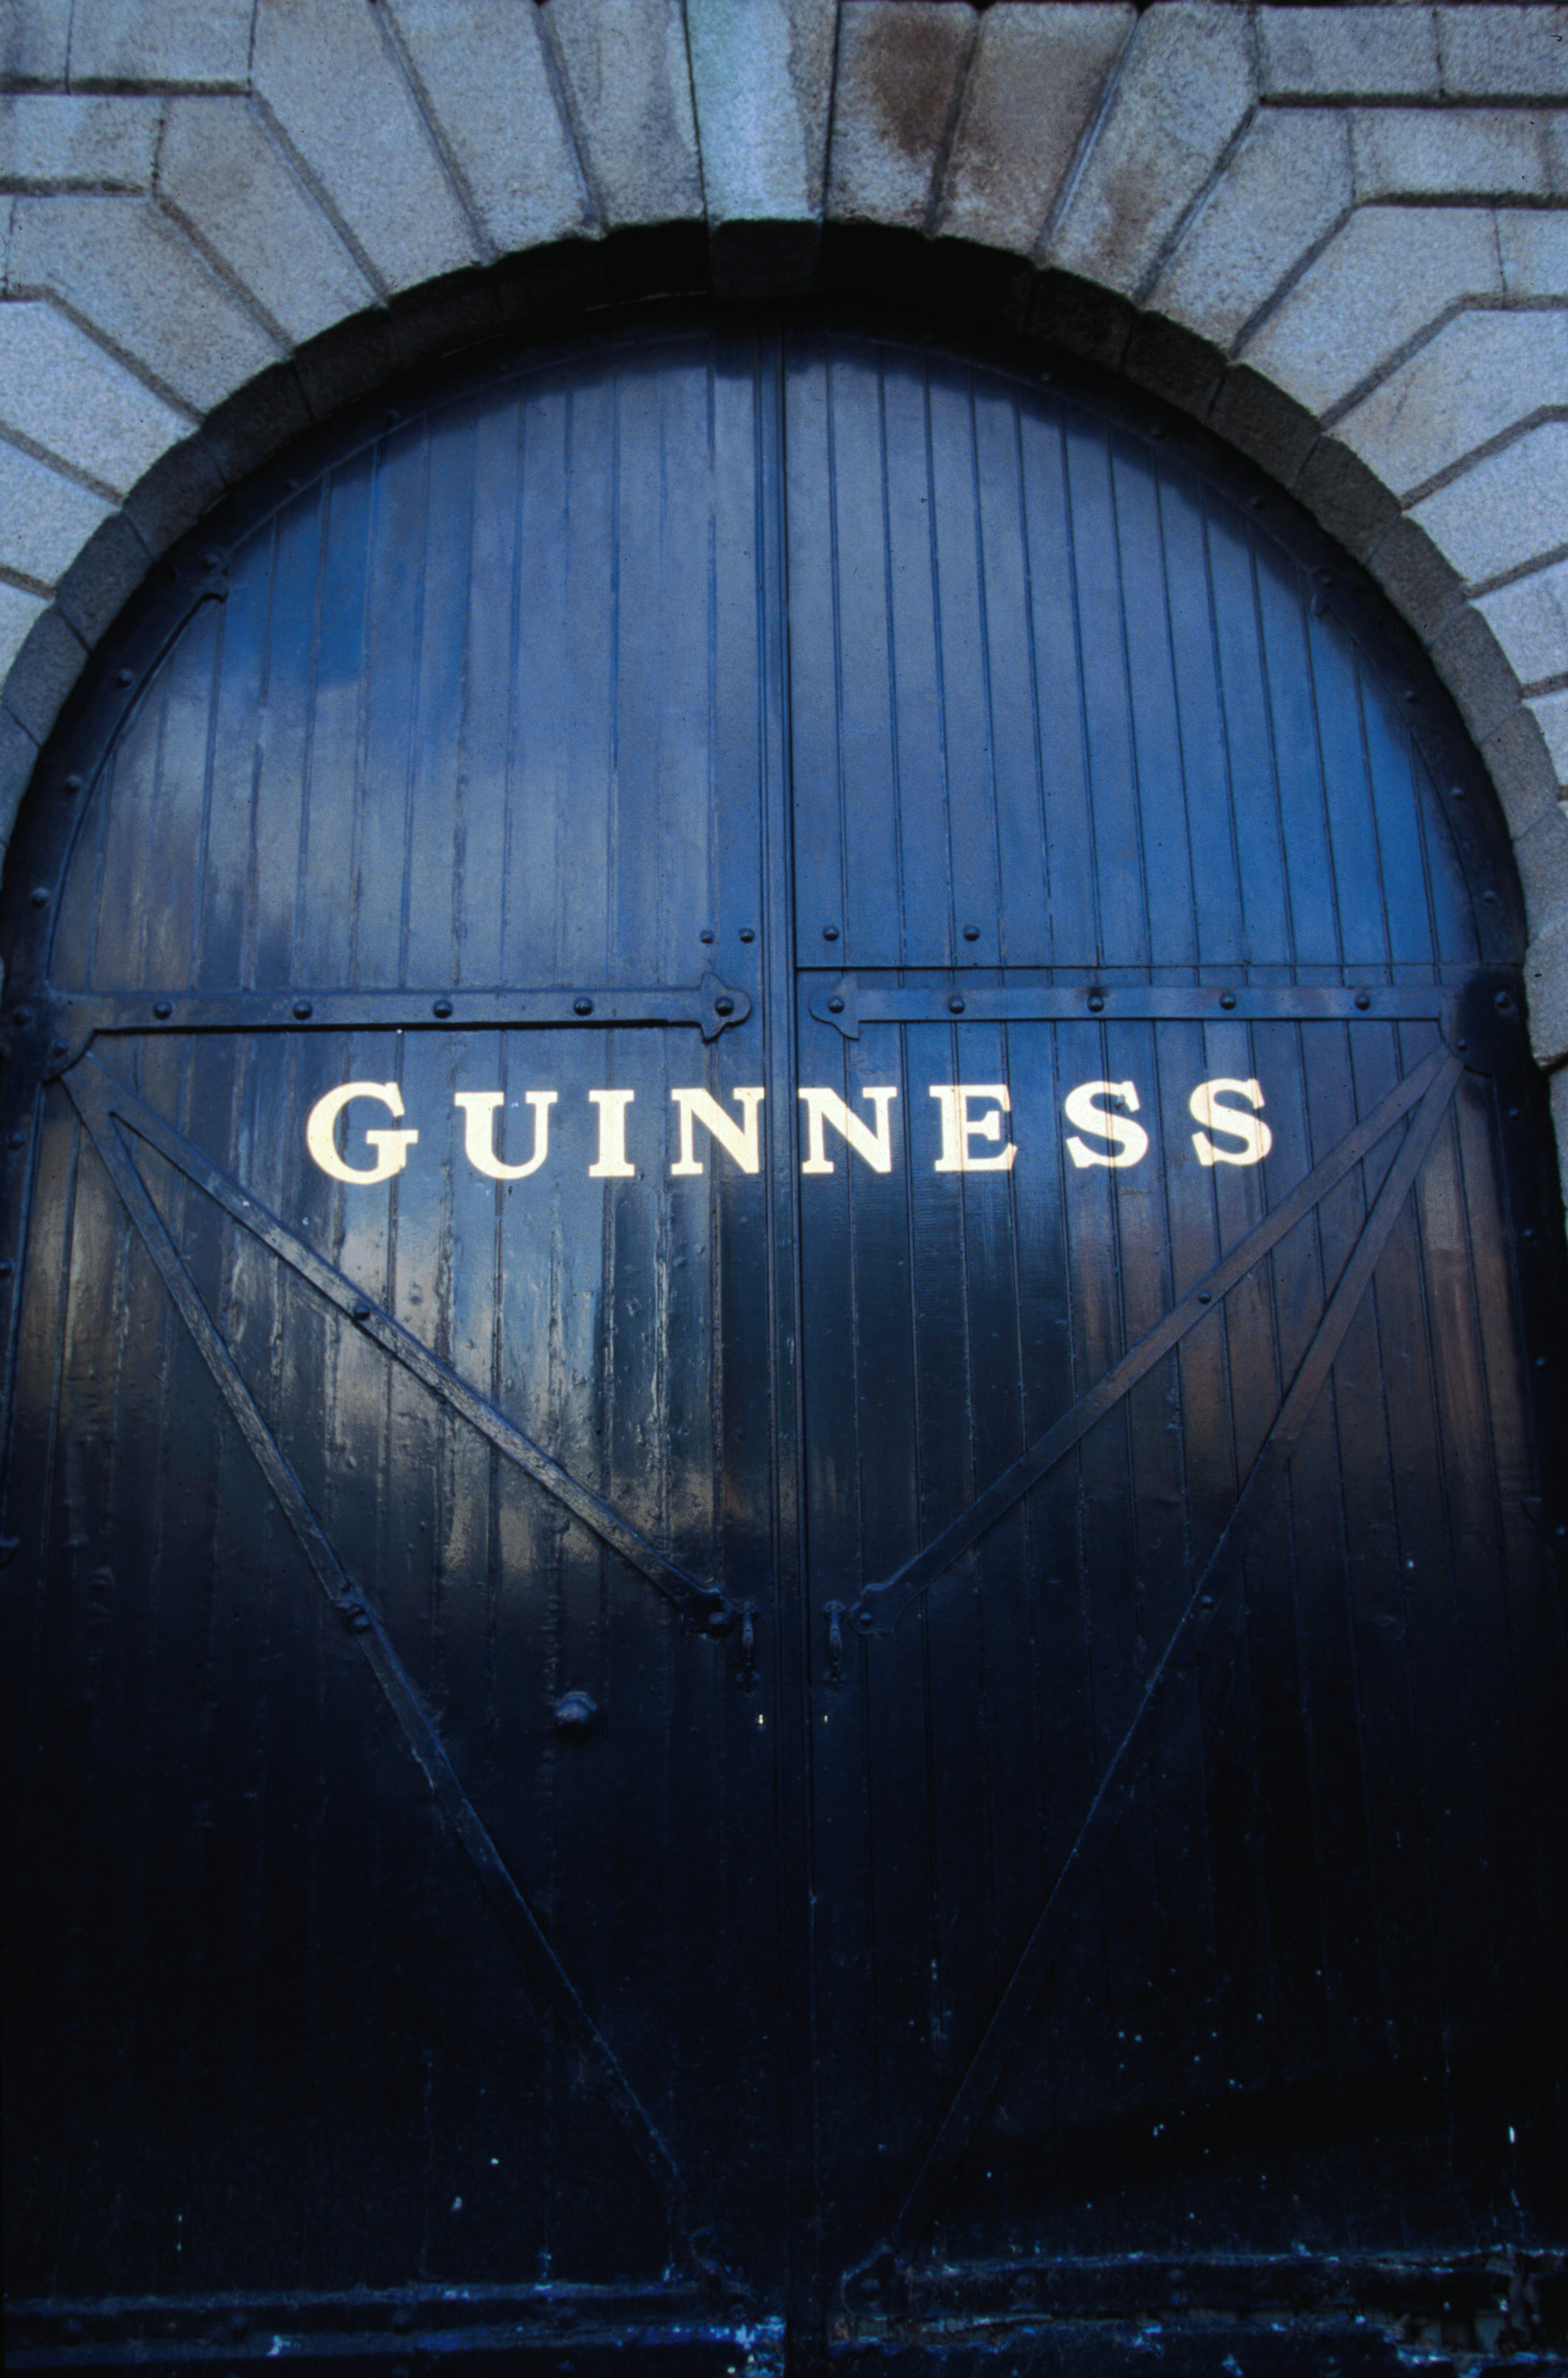 Guinness Draught has been available since 1959.